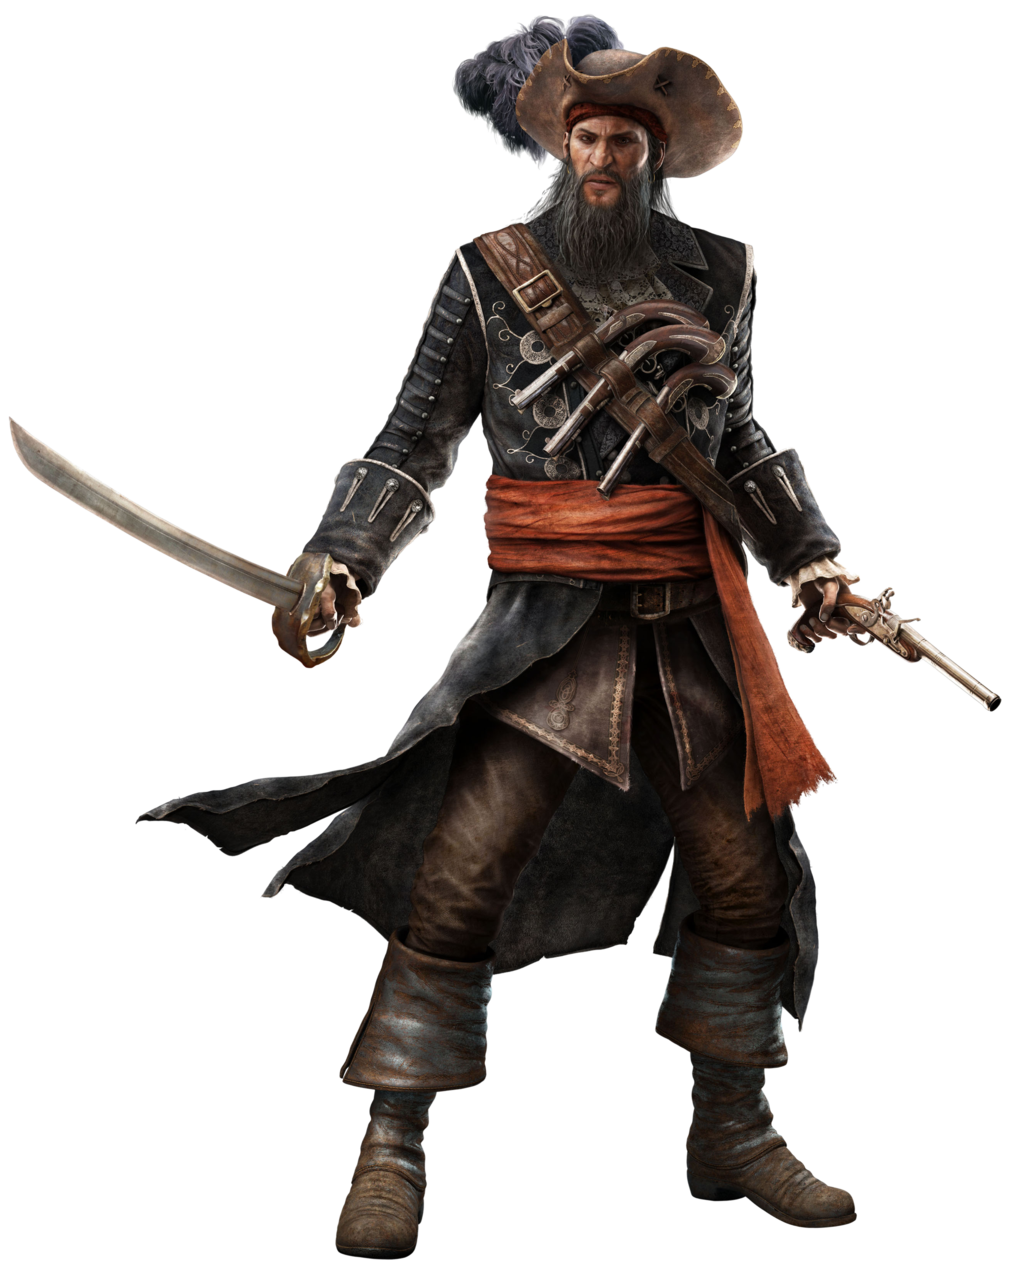 Pirate Png Transparent Image Download Size 1024x1280px